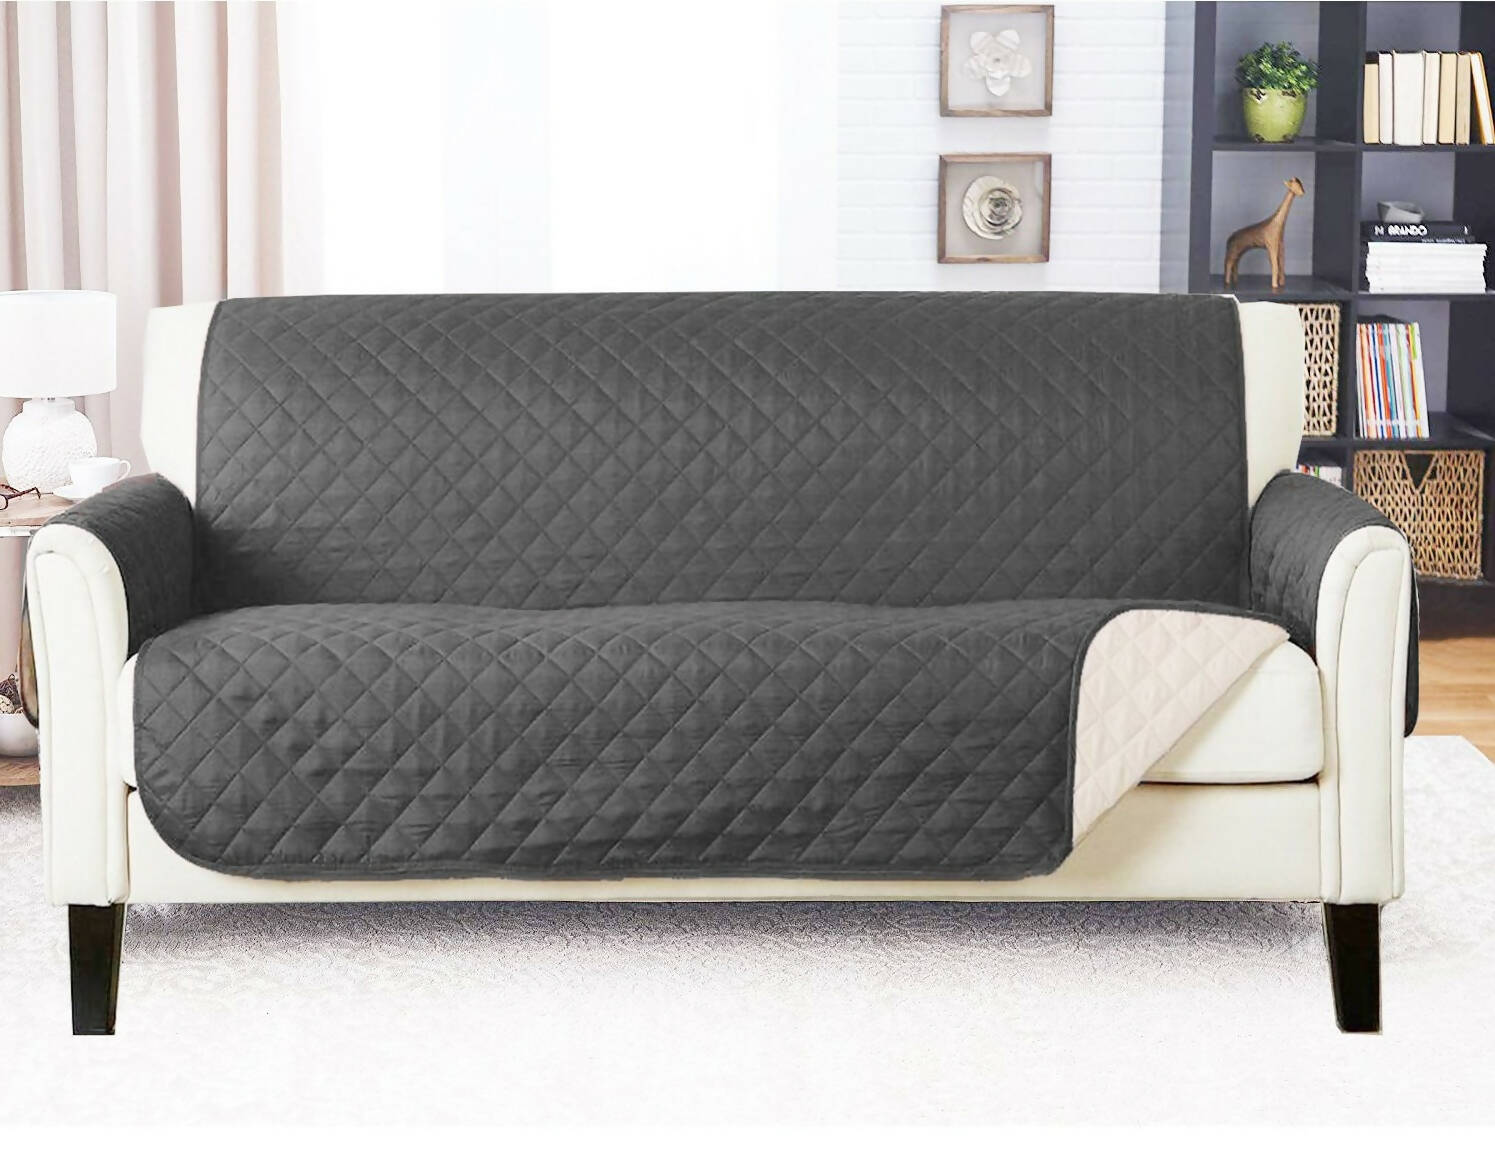 Sofa Cover Turkey Style - Home Textile (Standard Size) 7 seaters